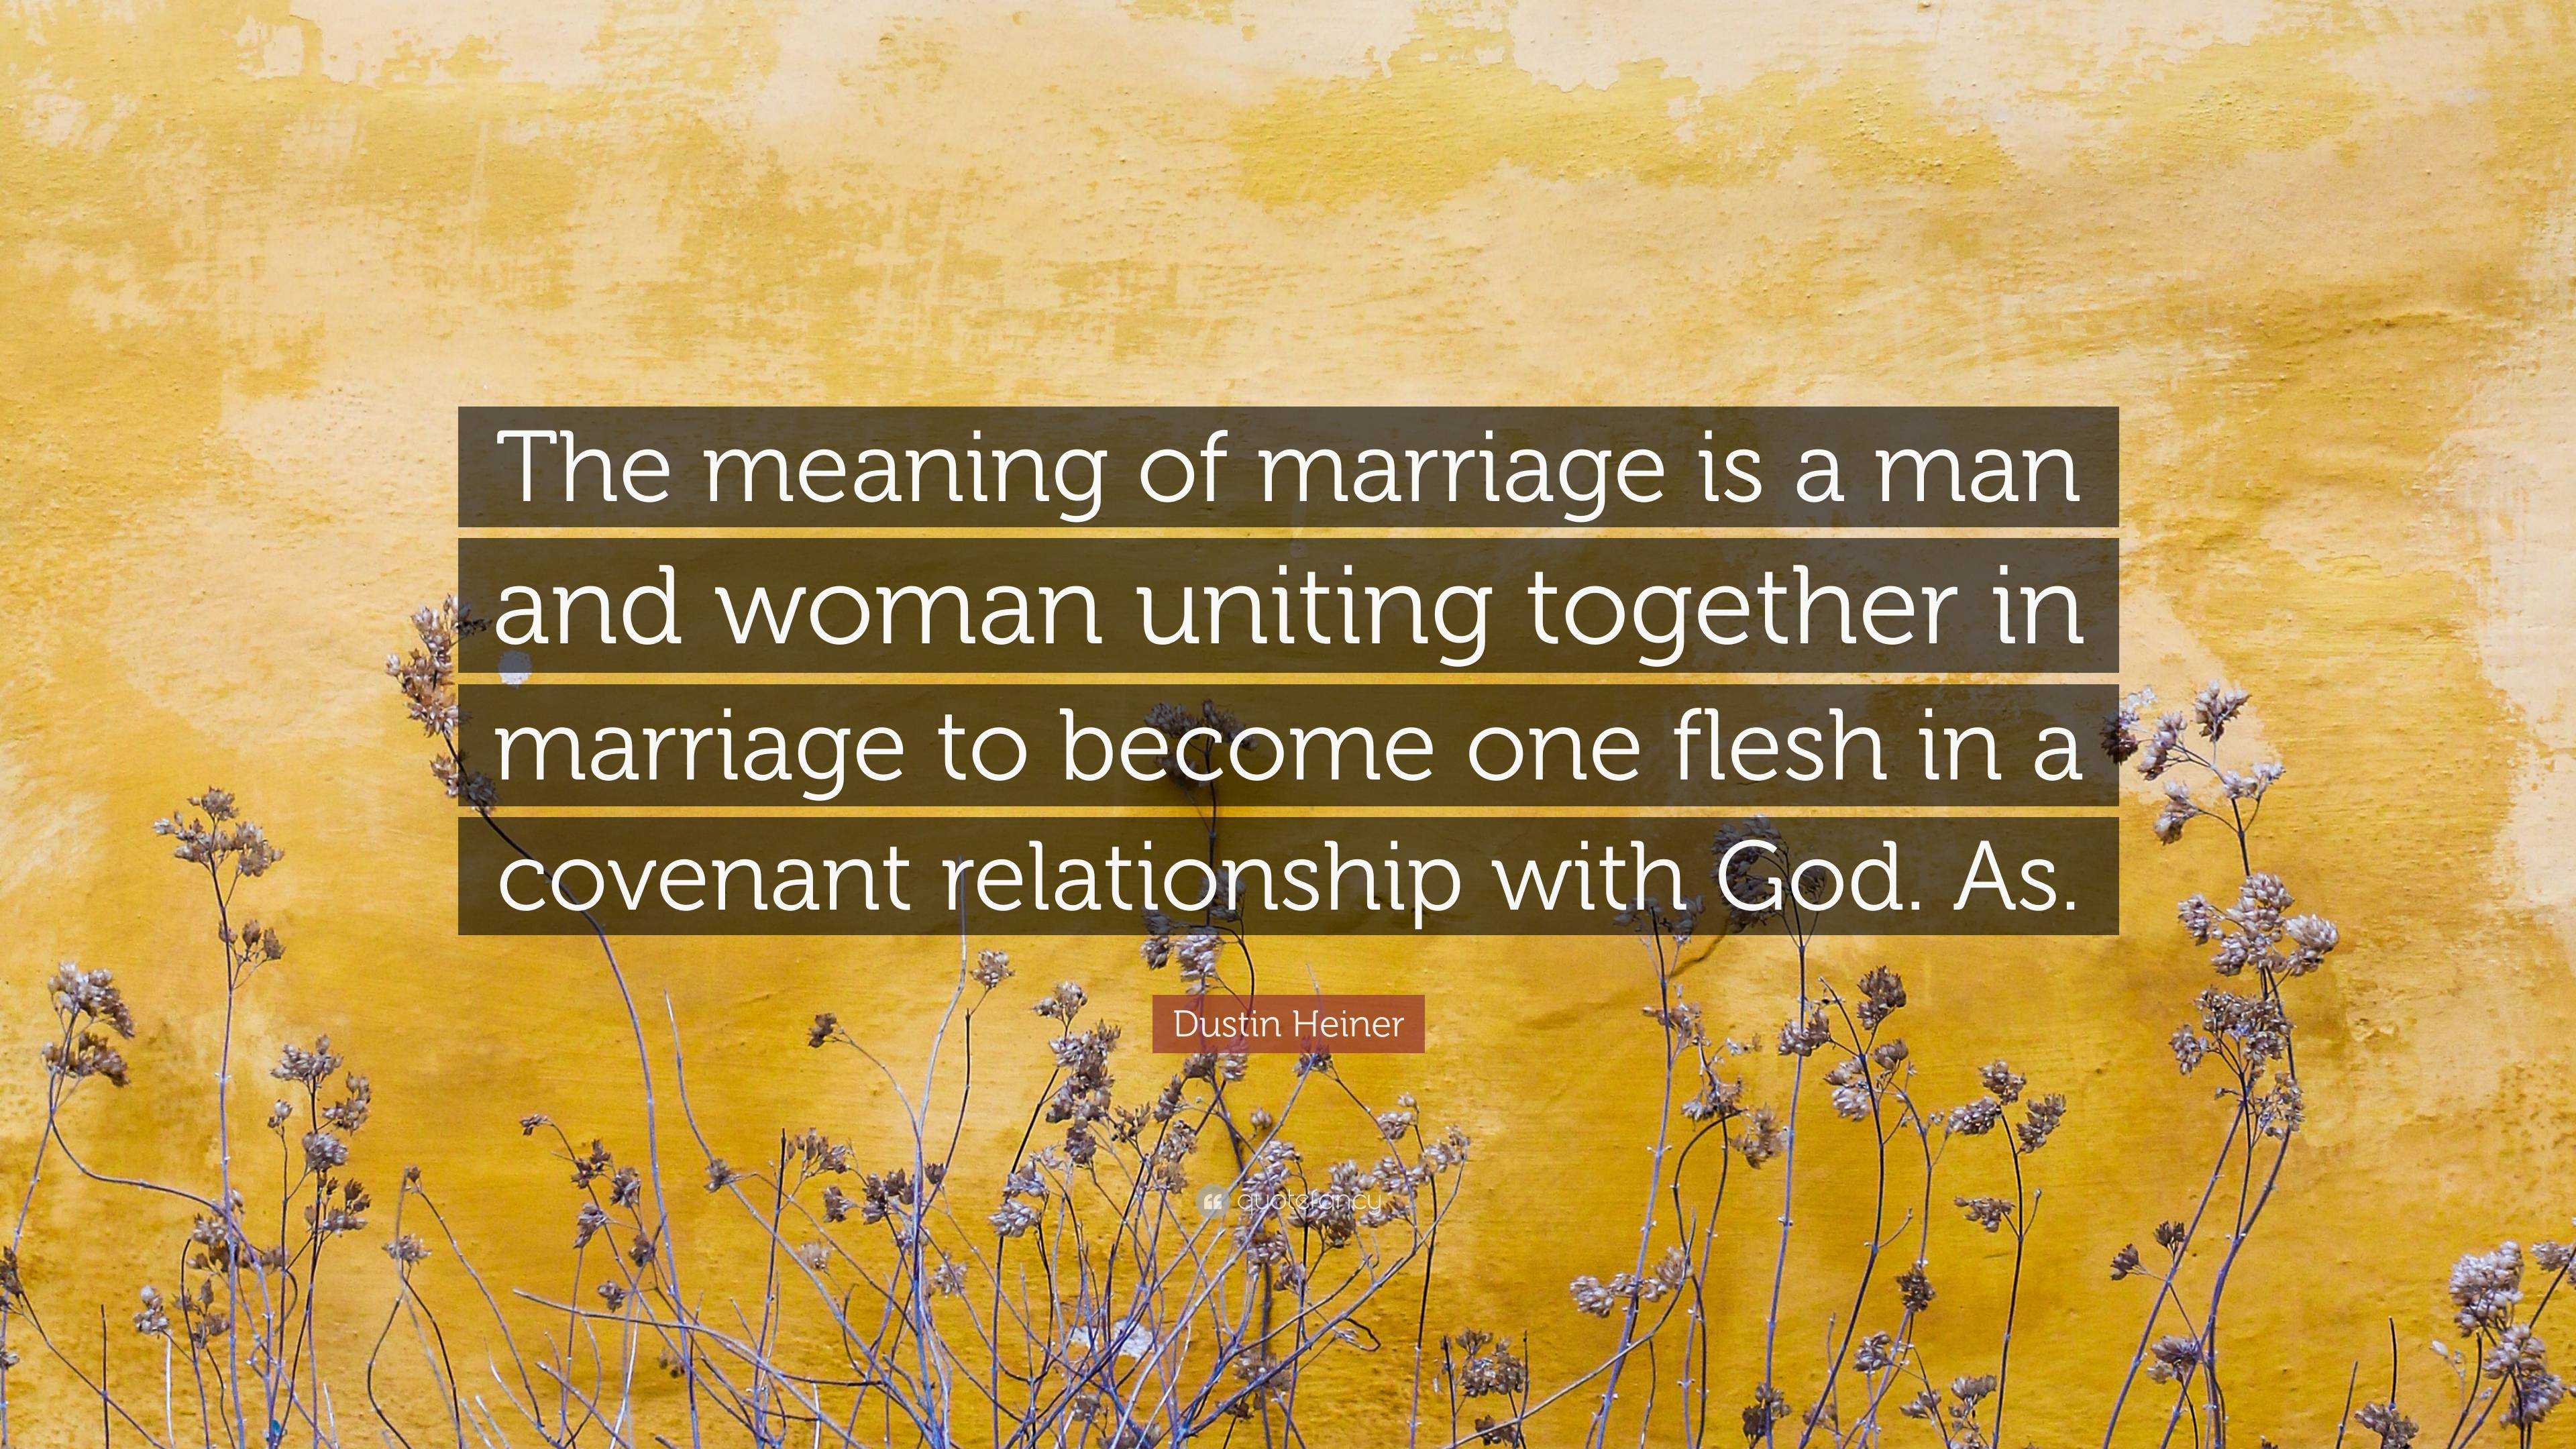 Dustin Heiner Quote The Meaning Of Marriage Is A Man And Woman Uniting Together In Marriage To Become One Flesh In A Covenant Relationship W